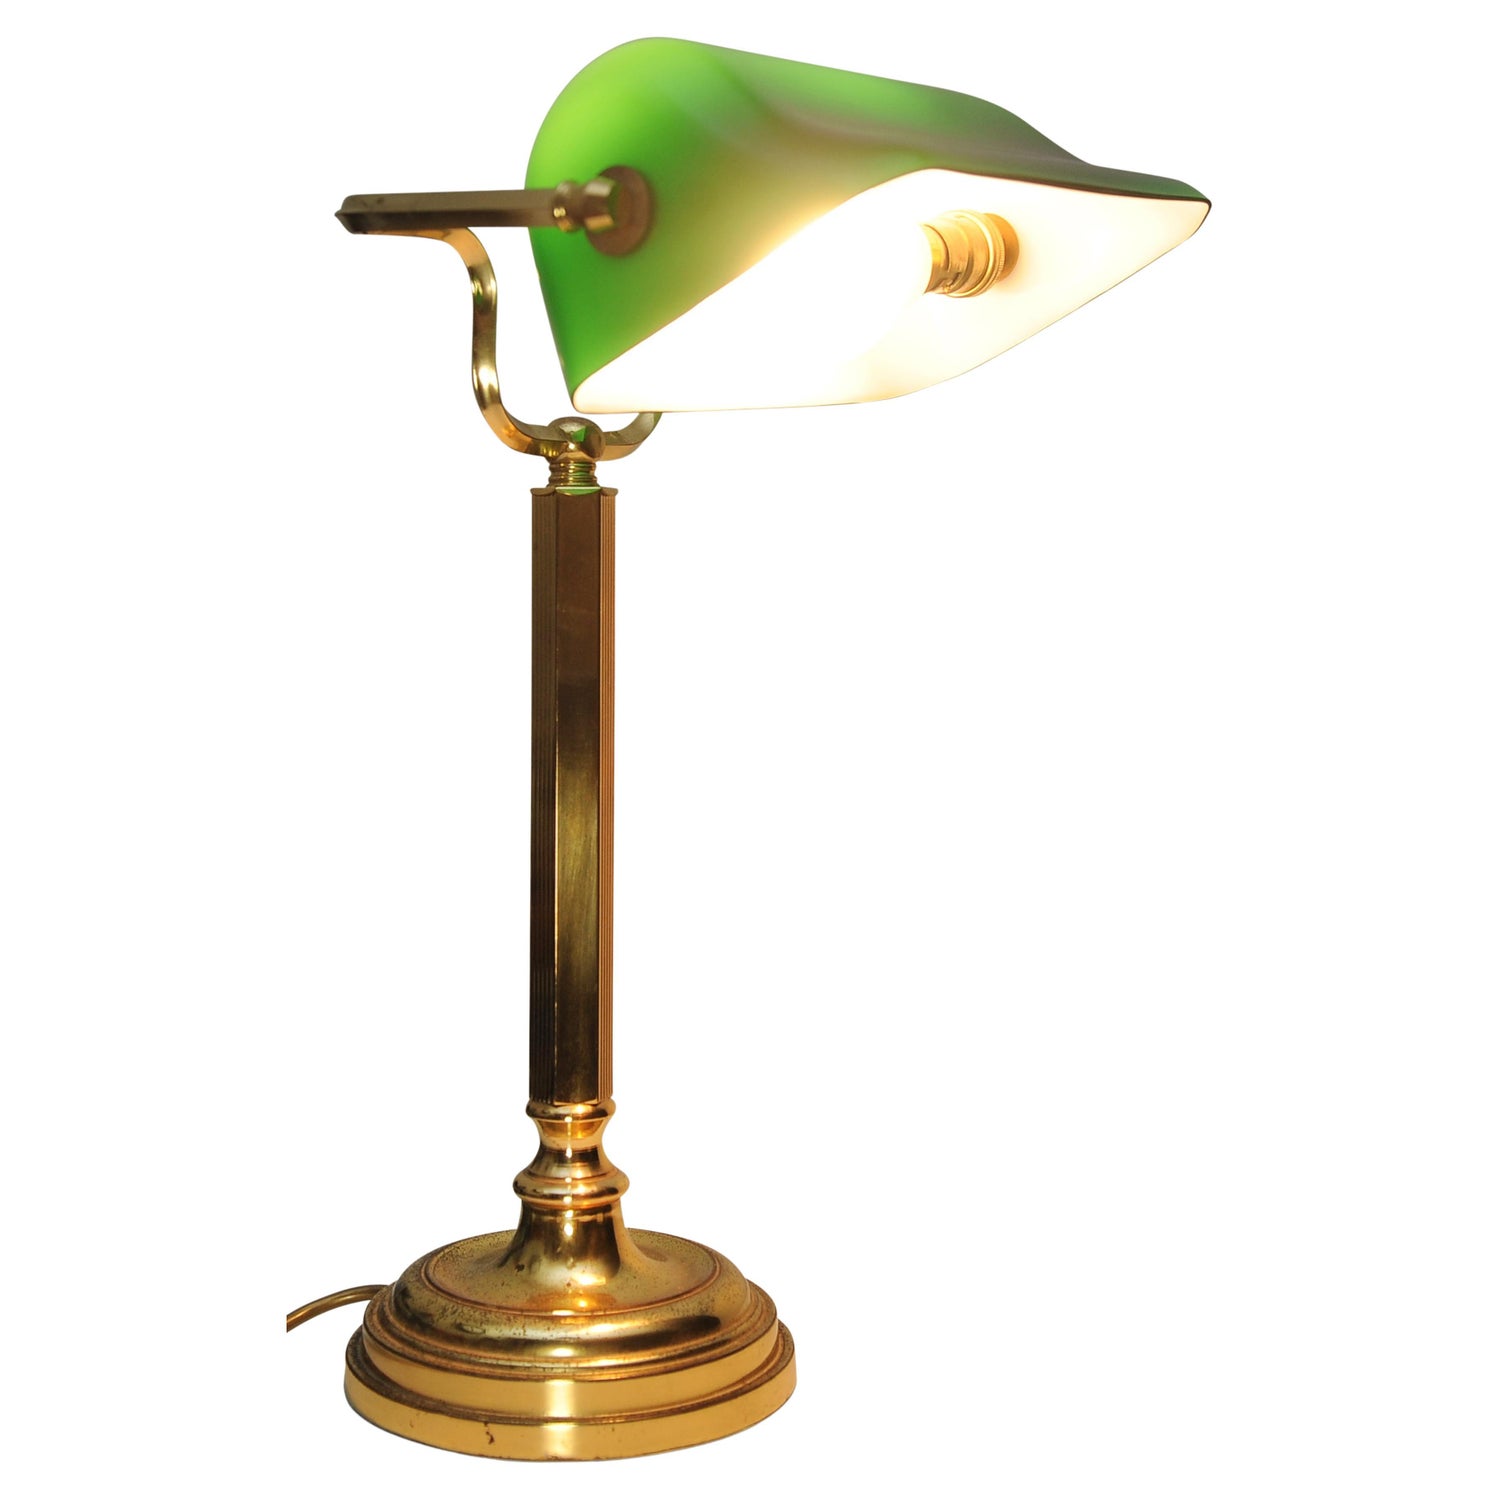 Emeralite Bankers Desk Lamp with Green Glass Shade and Decorative